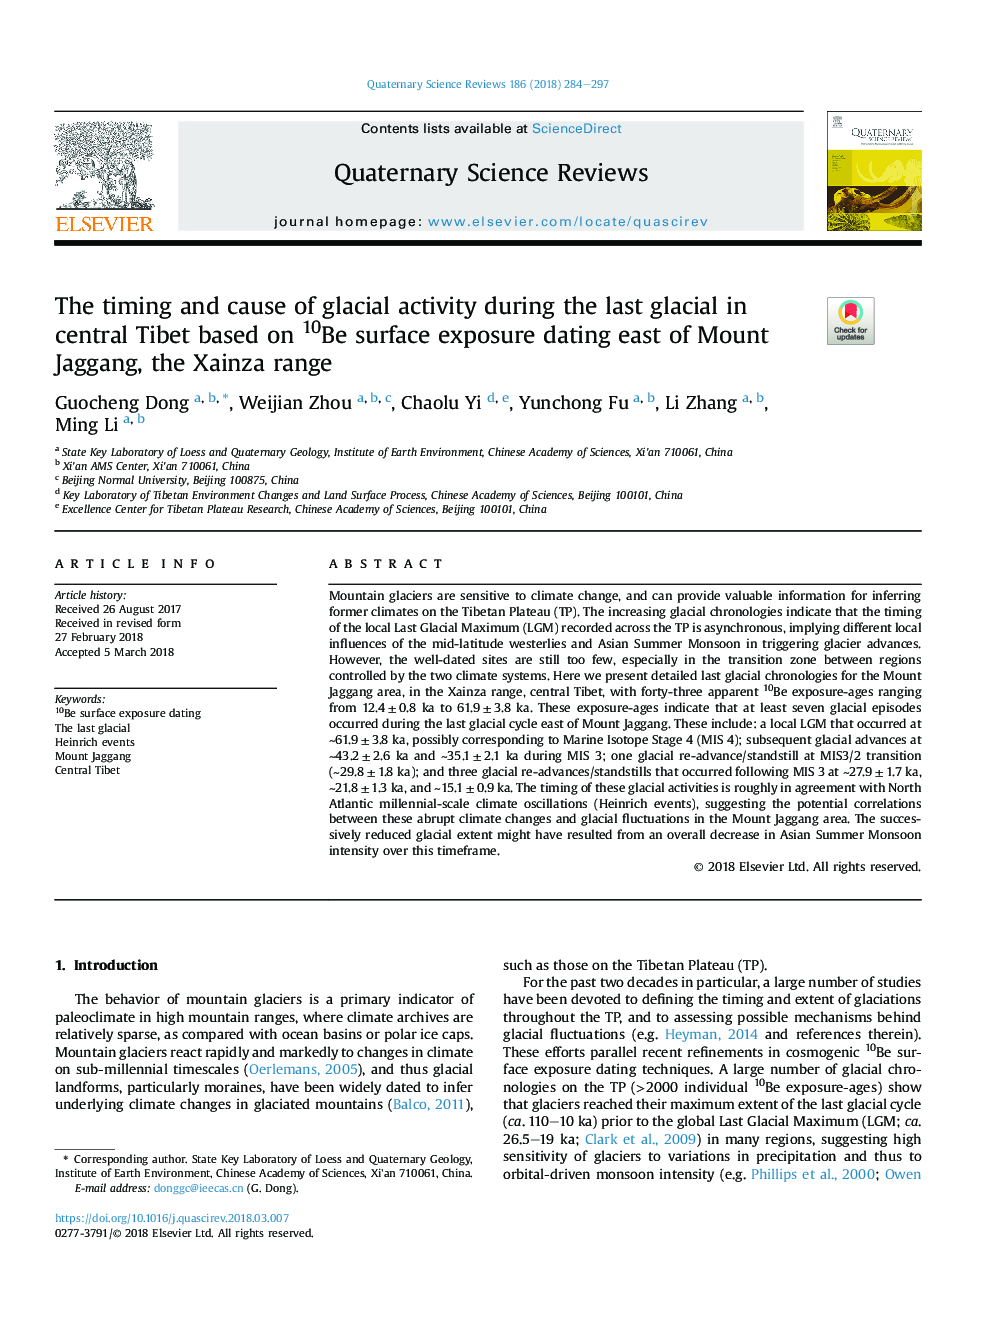 The timing and cause of glacial activity during the last glacial in central Tibet based on 10Be surface exposure dating east of Mount Jaggang, the Xainza range